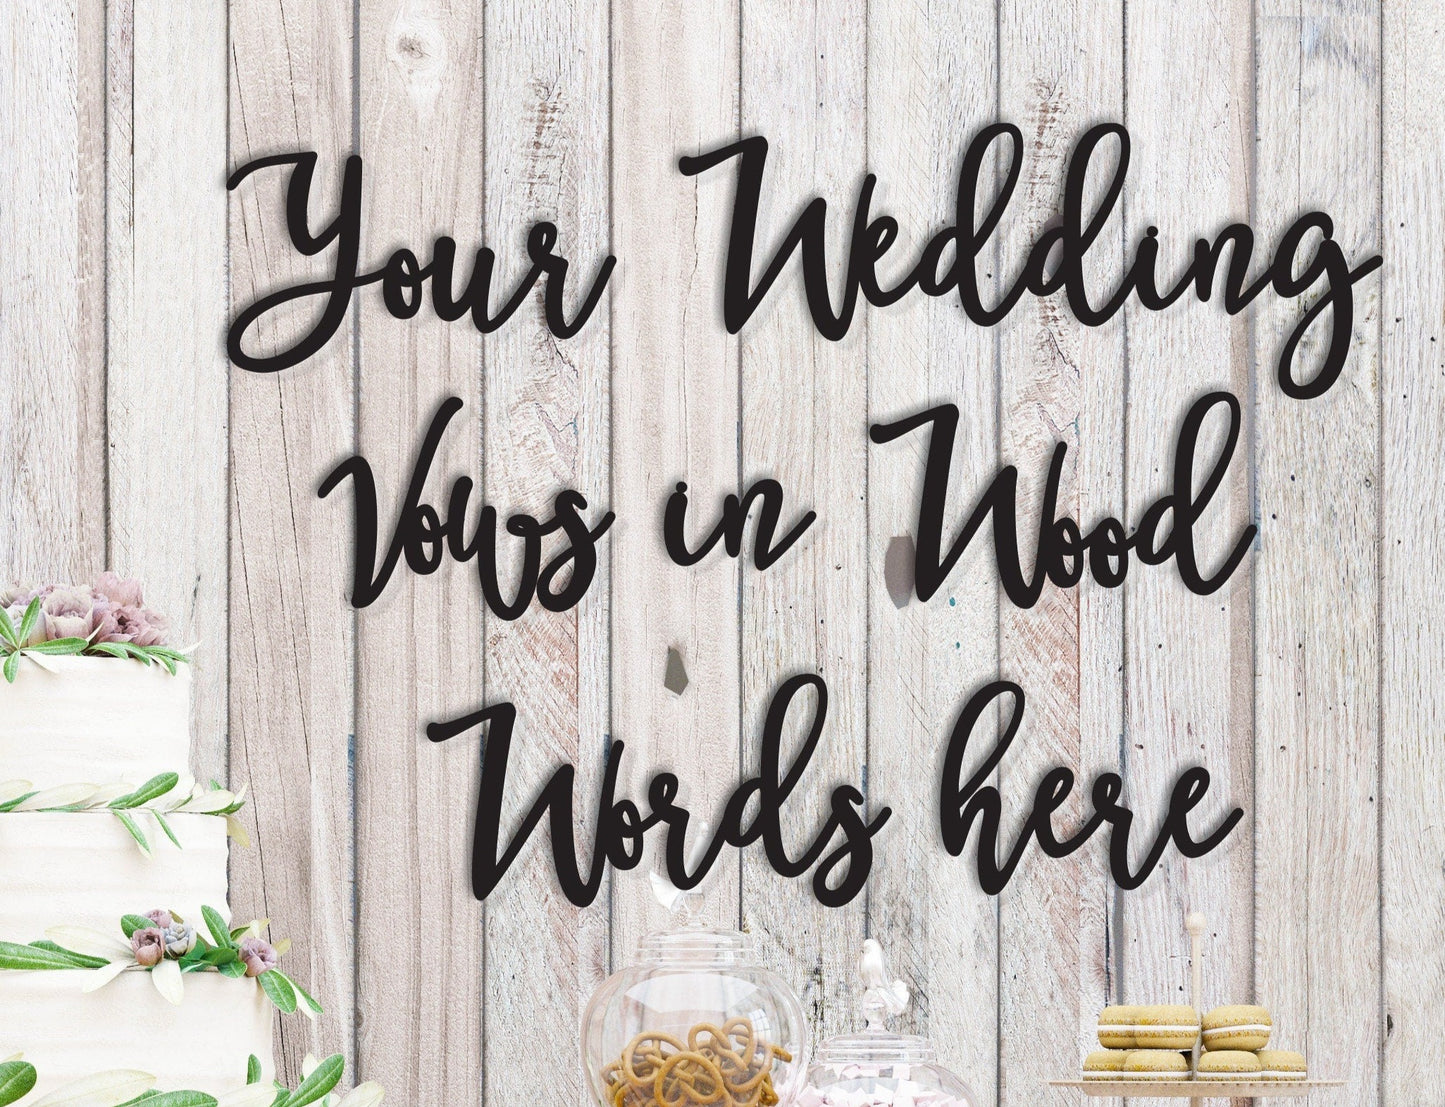 Custom wood words, Custom word signs, Wall Quotes, Wooden Word Cutout Phrases, Personalized Wedding Vows, DIY Wedding Sign Decor with Vows